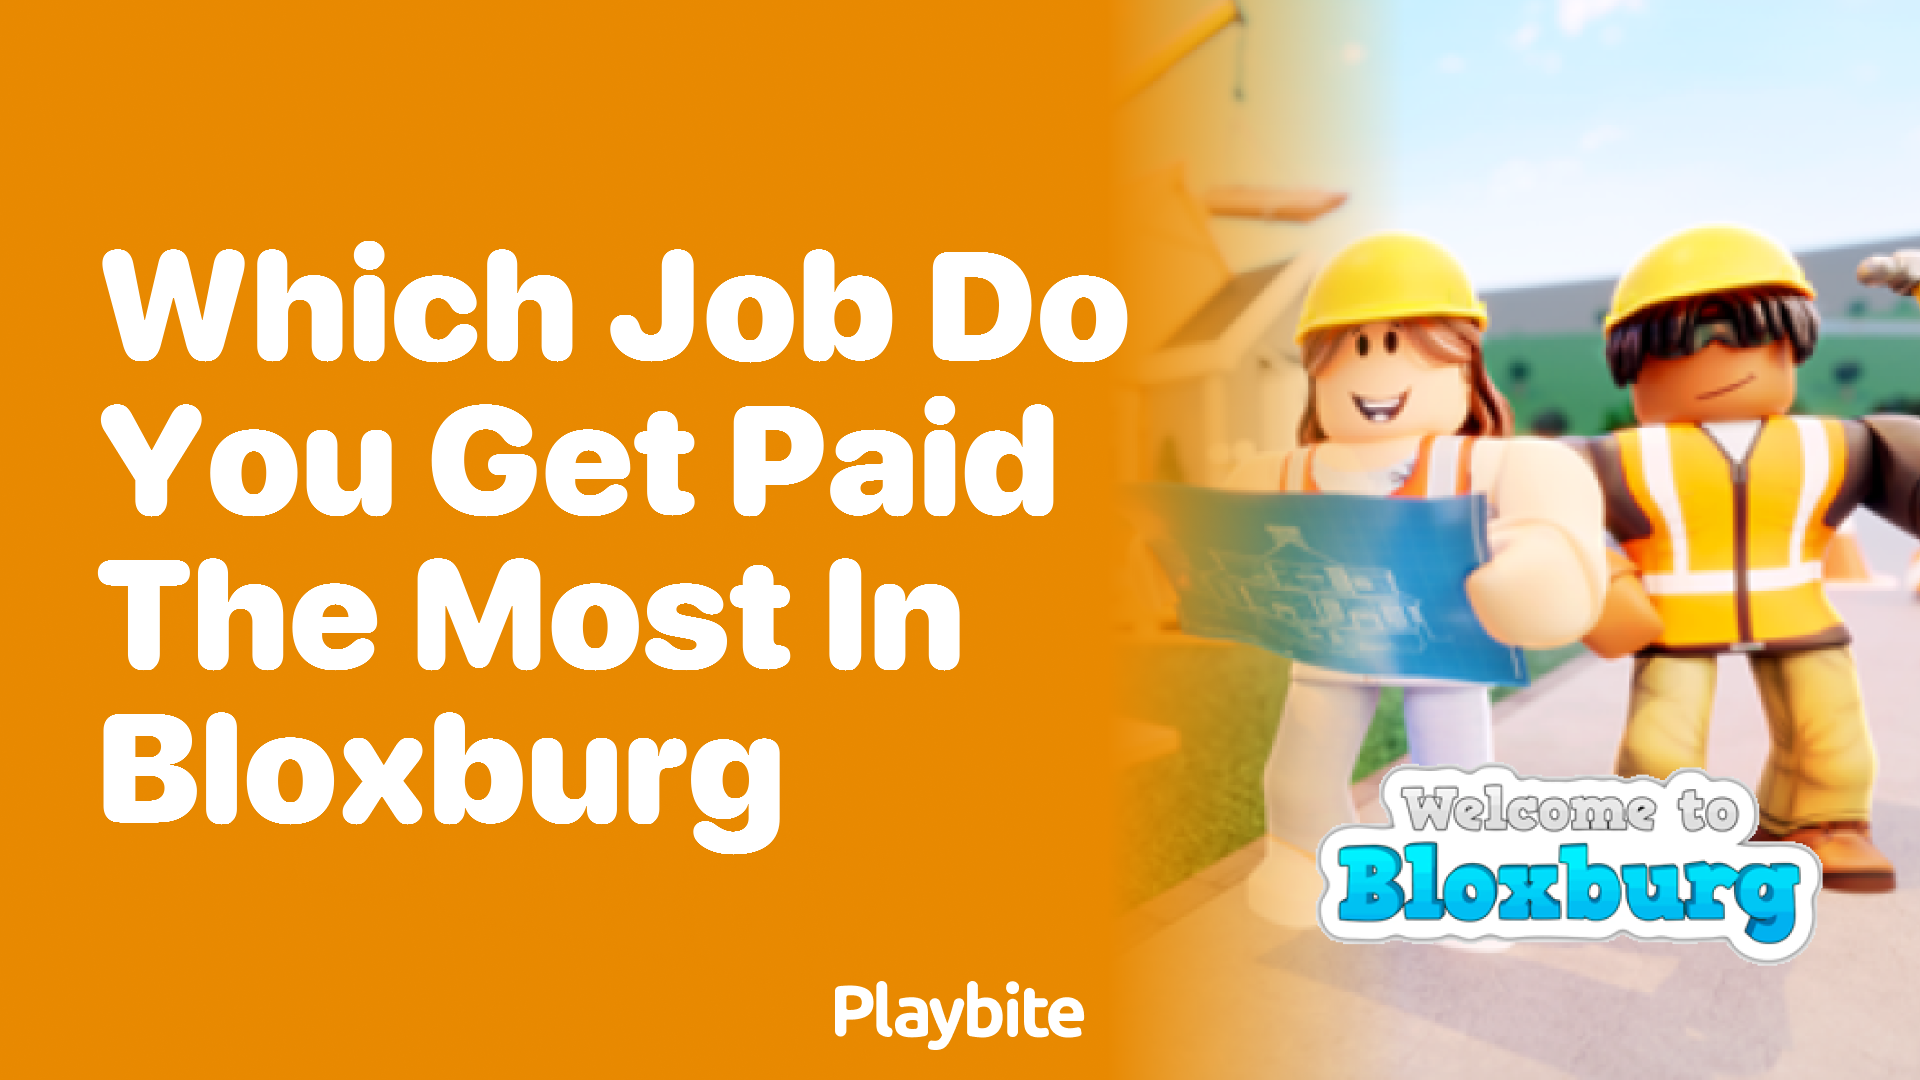 Discover Which Job Pays the Most in Bloxburg